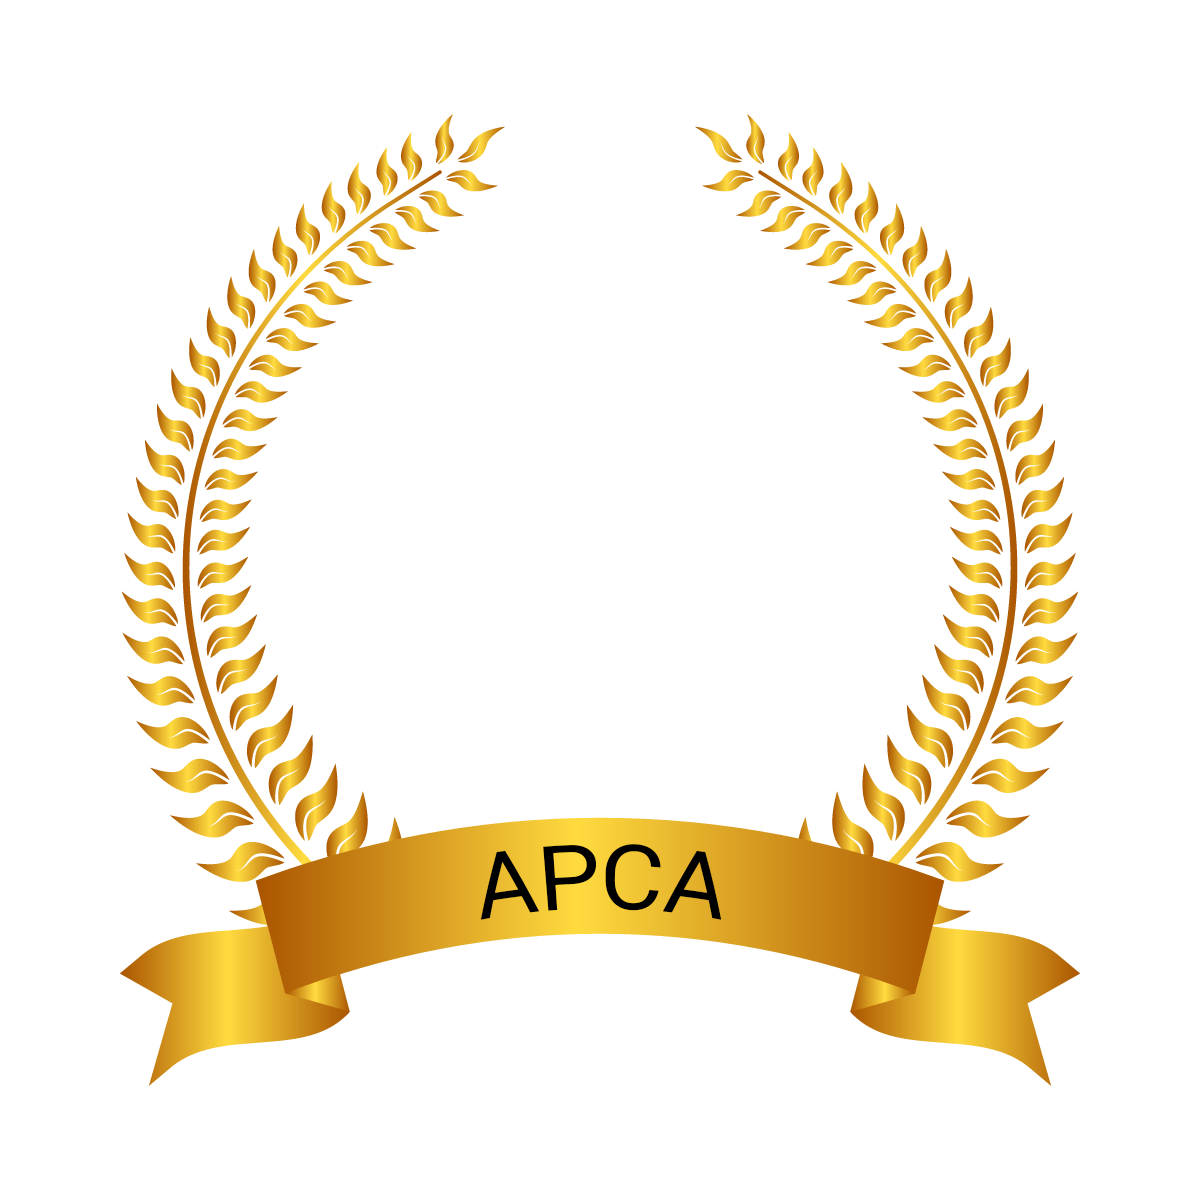 APCA - College Entertainer of the Year